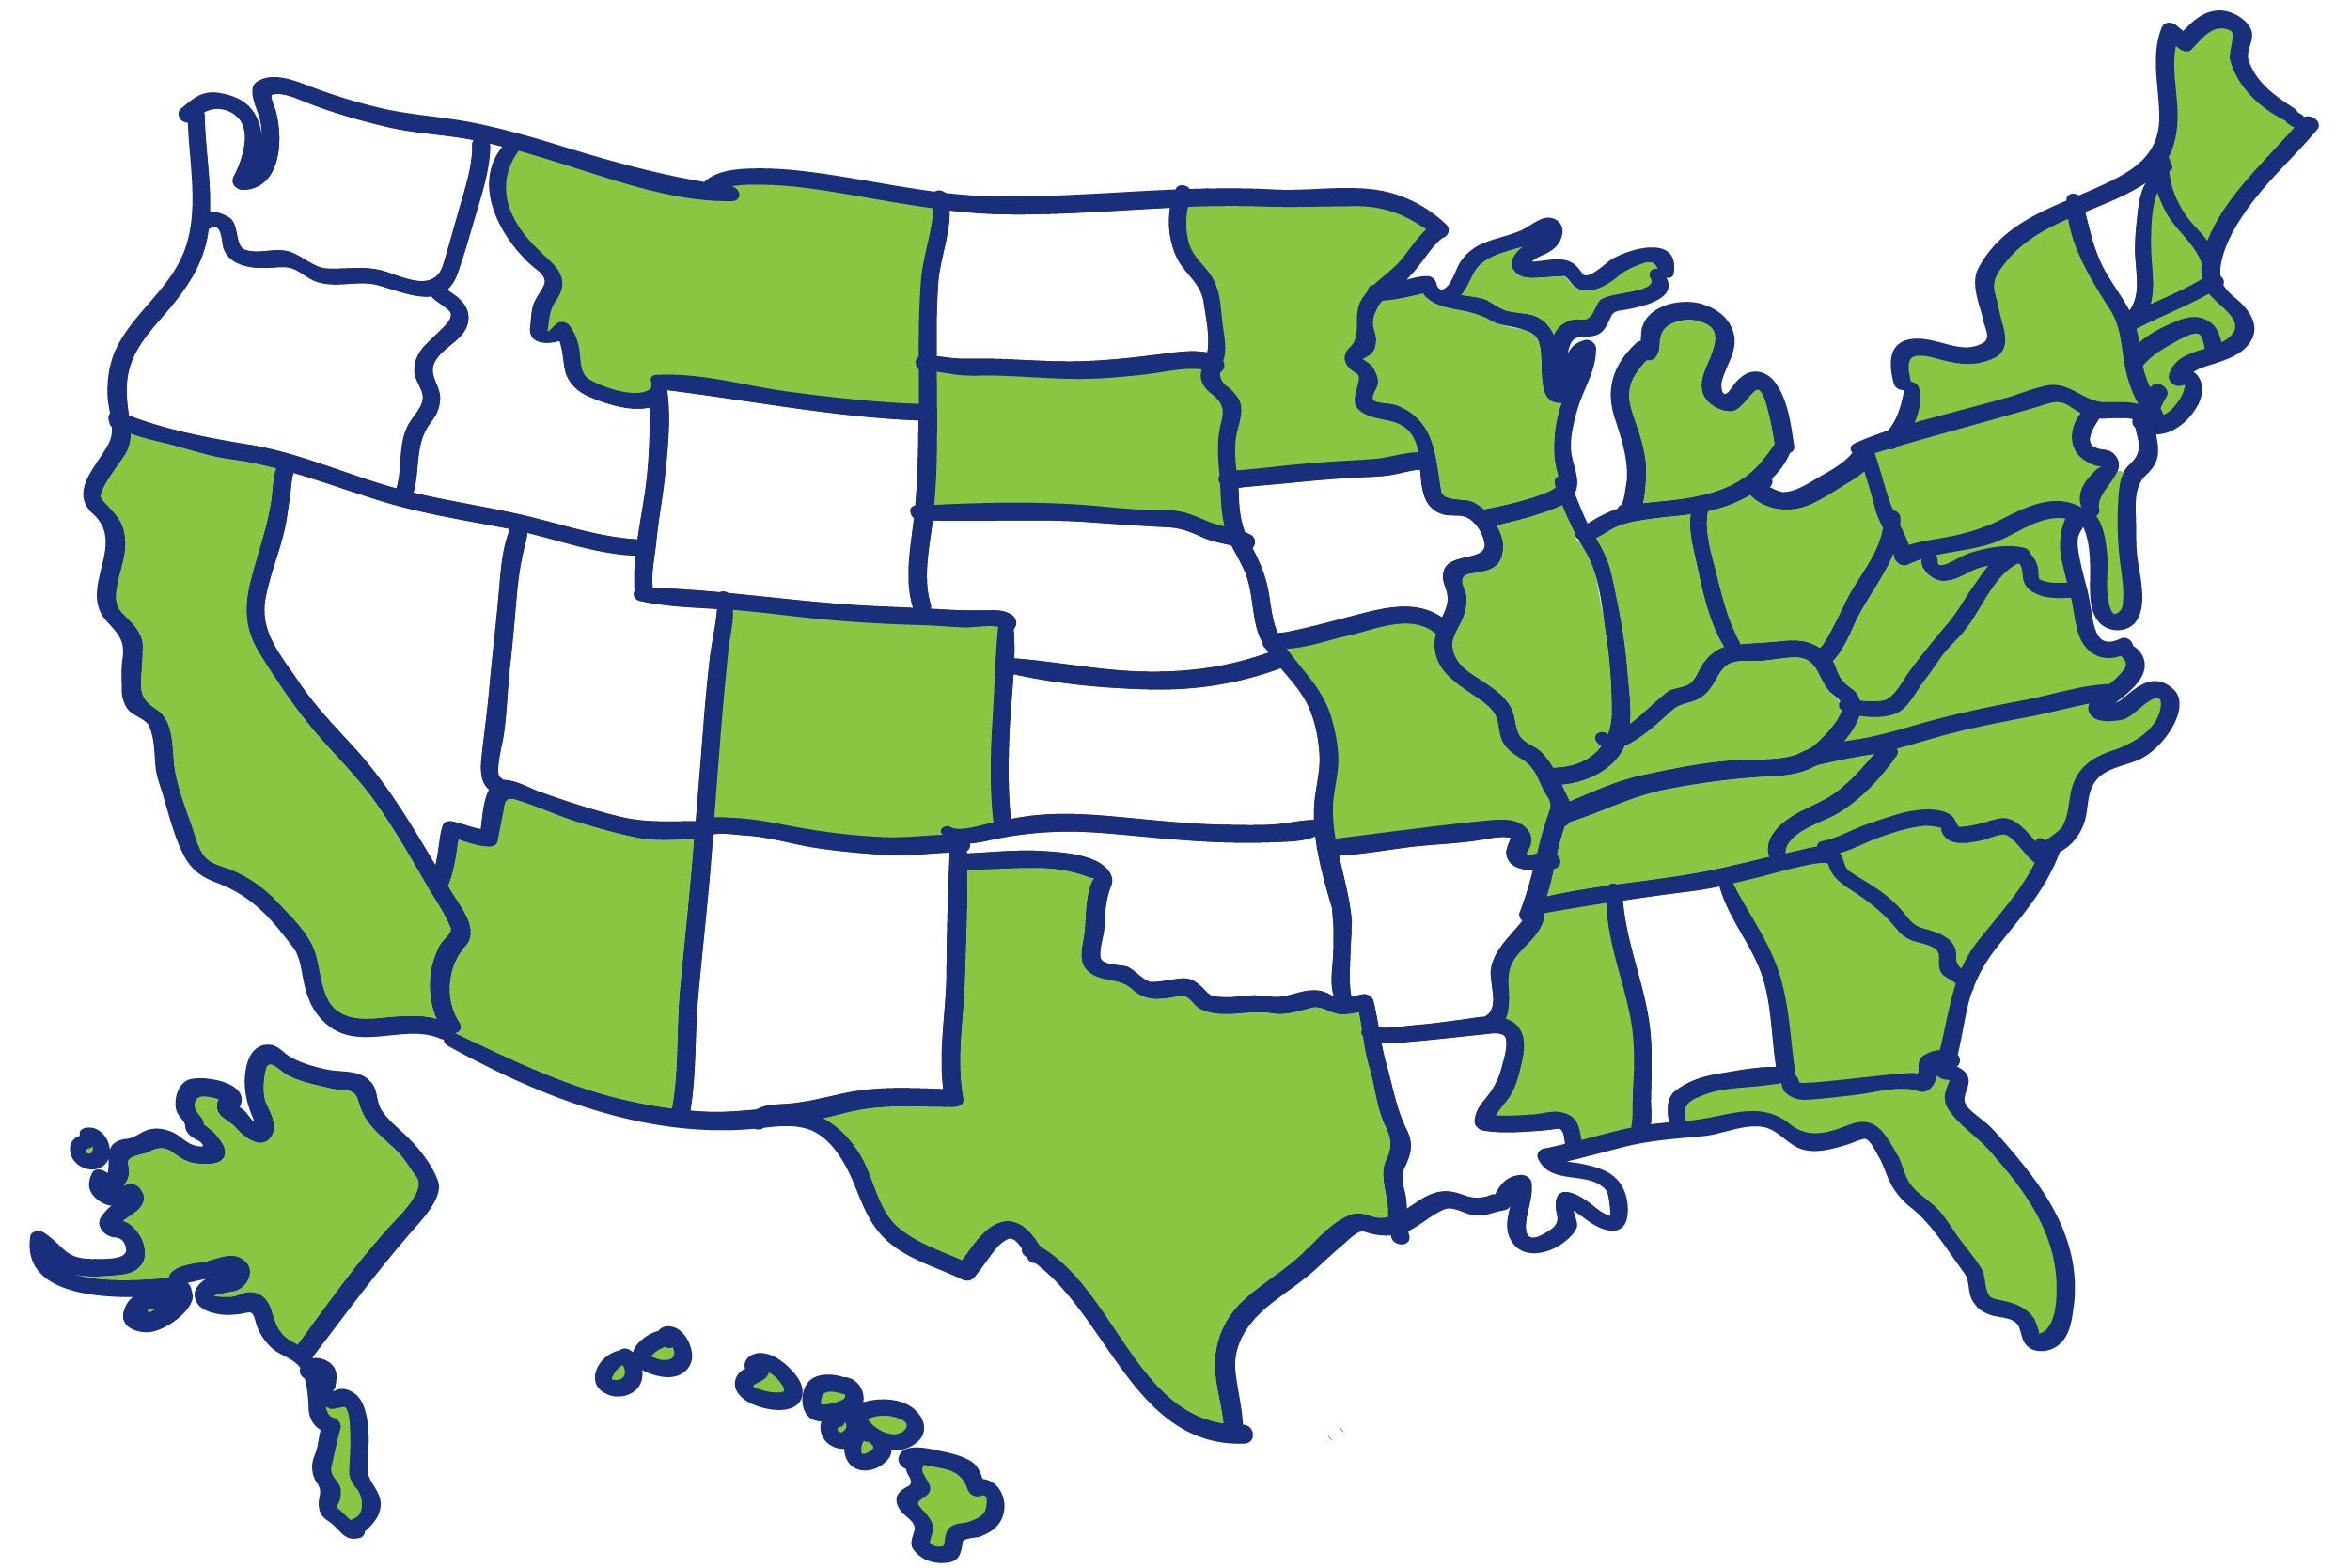 A map of the United States with the states where iMPROve Health operates highlighted.